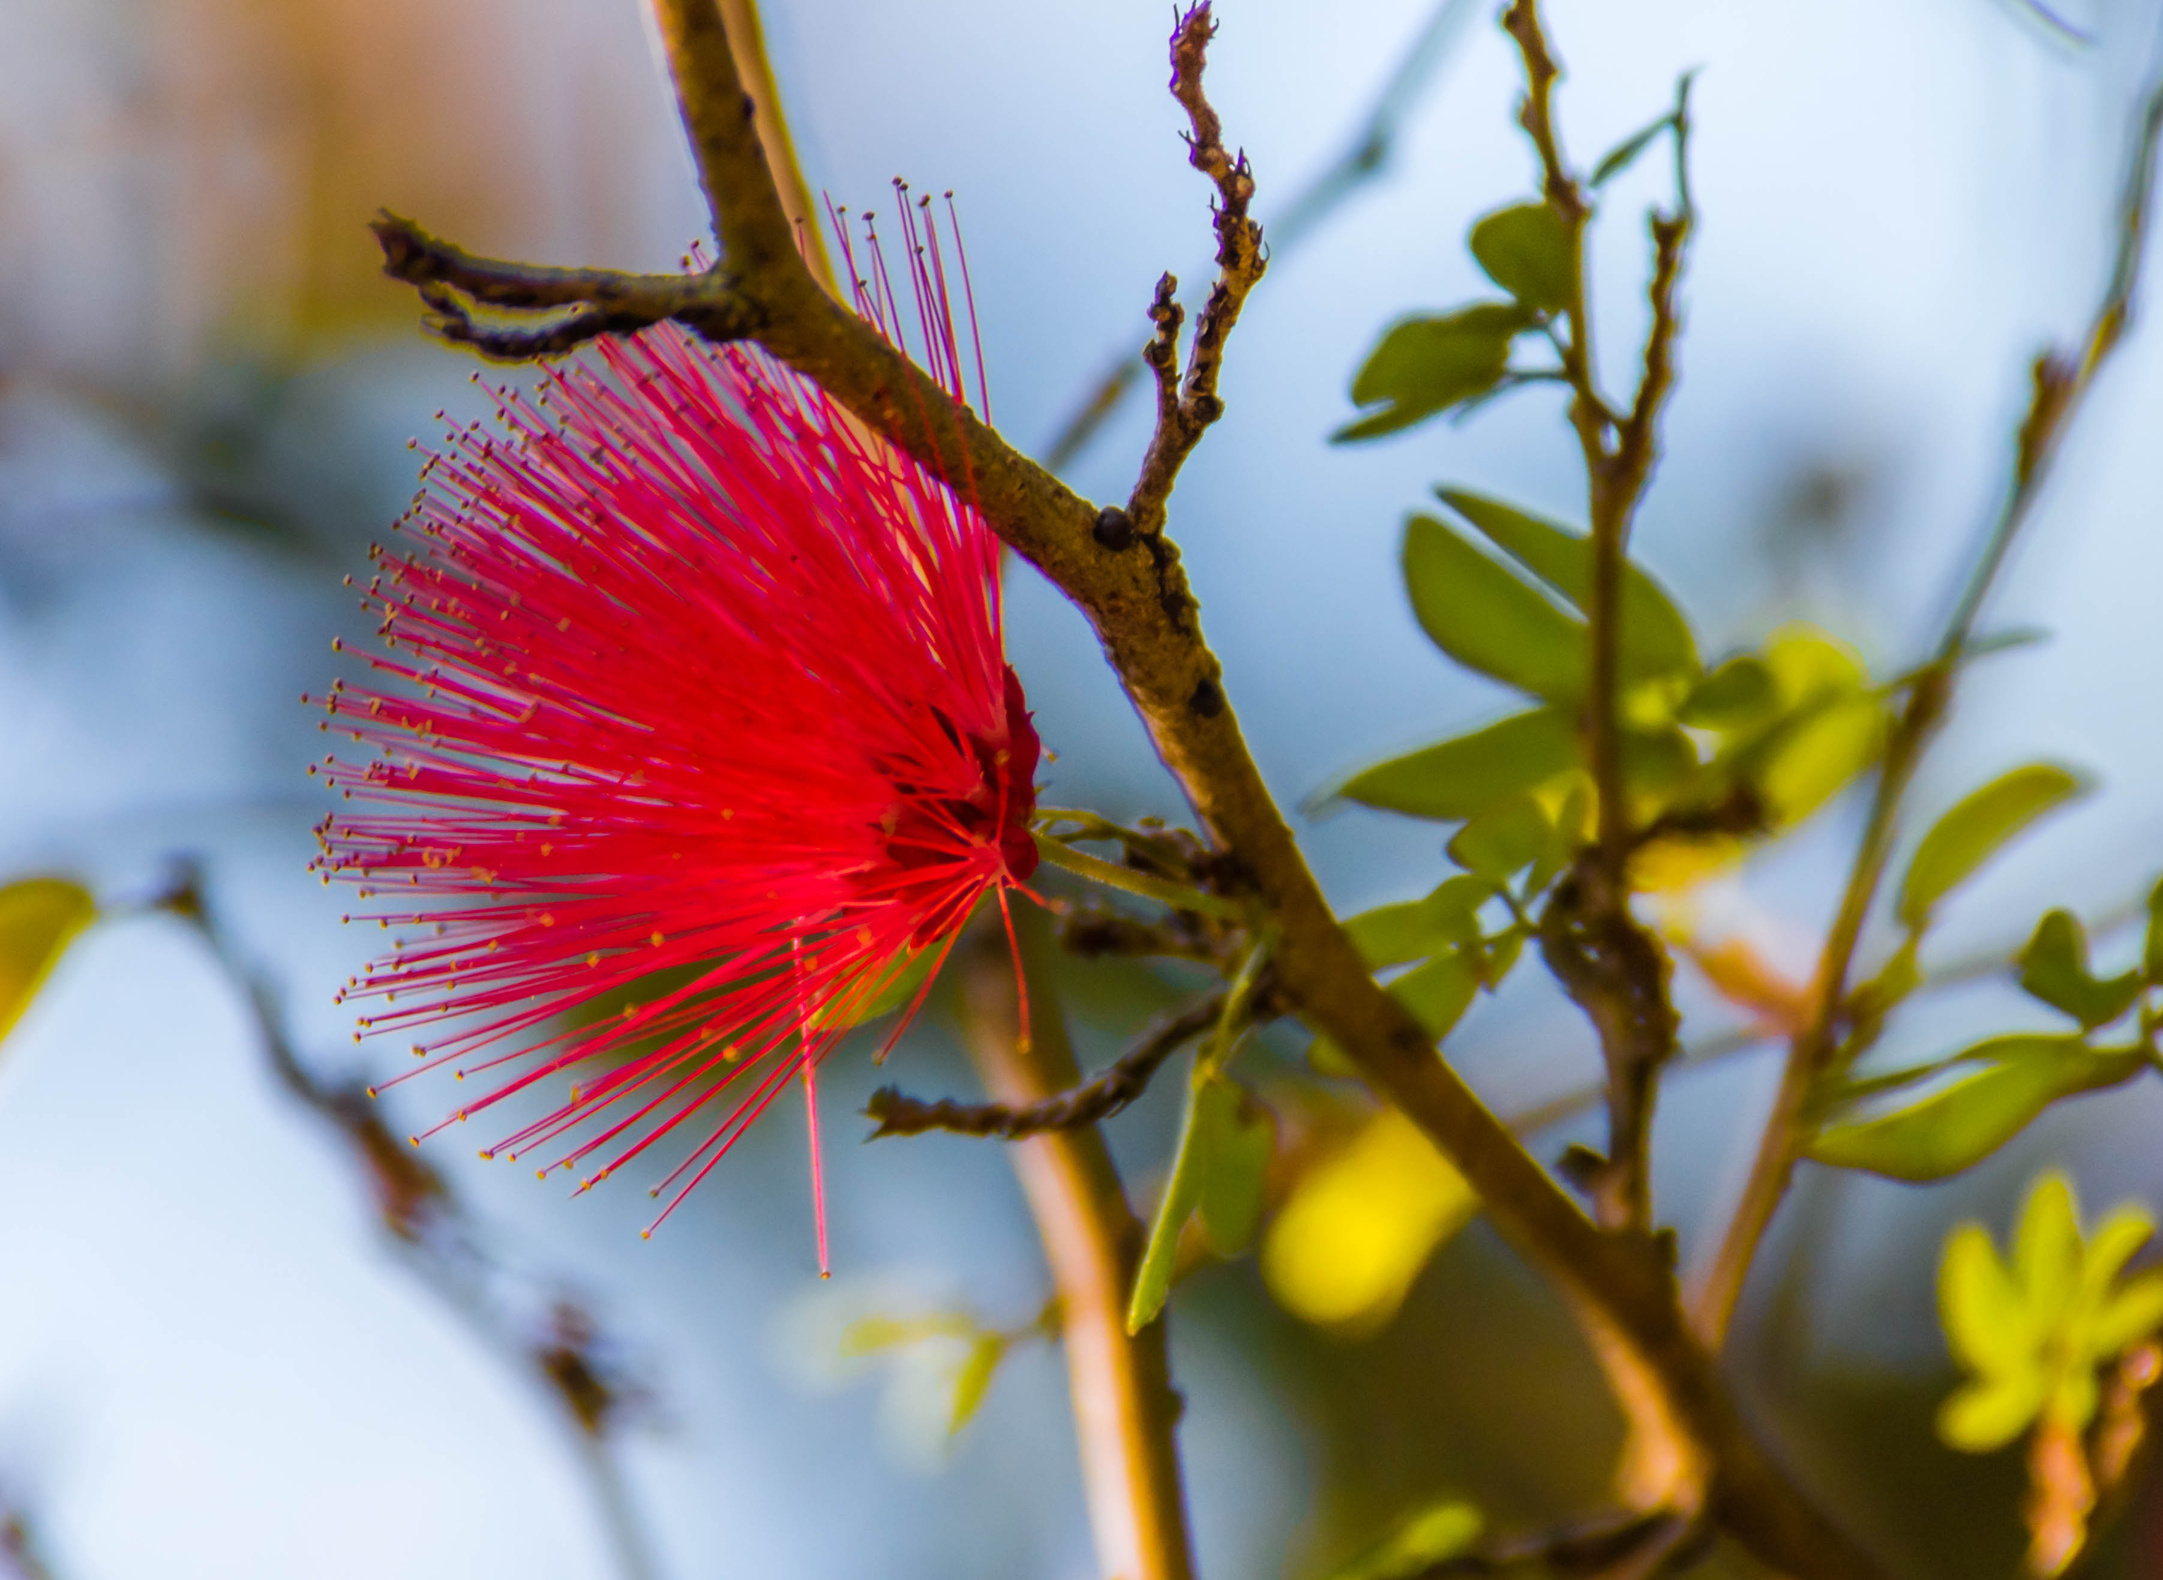 Red Powder Puff on a Branch